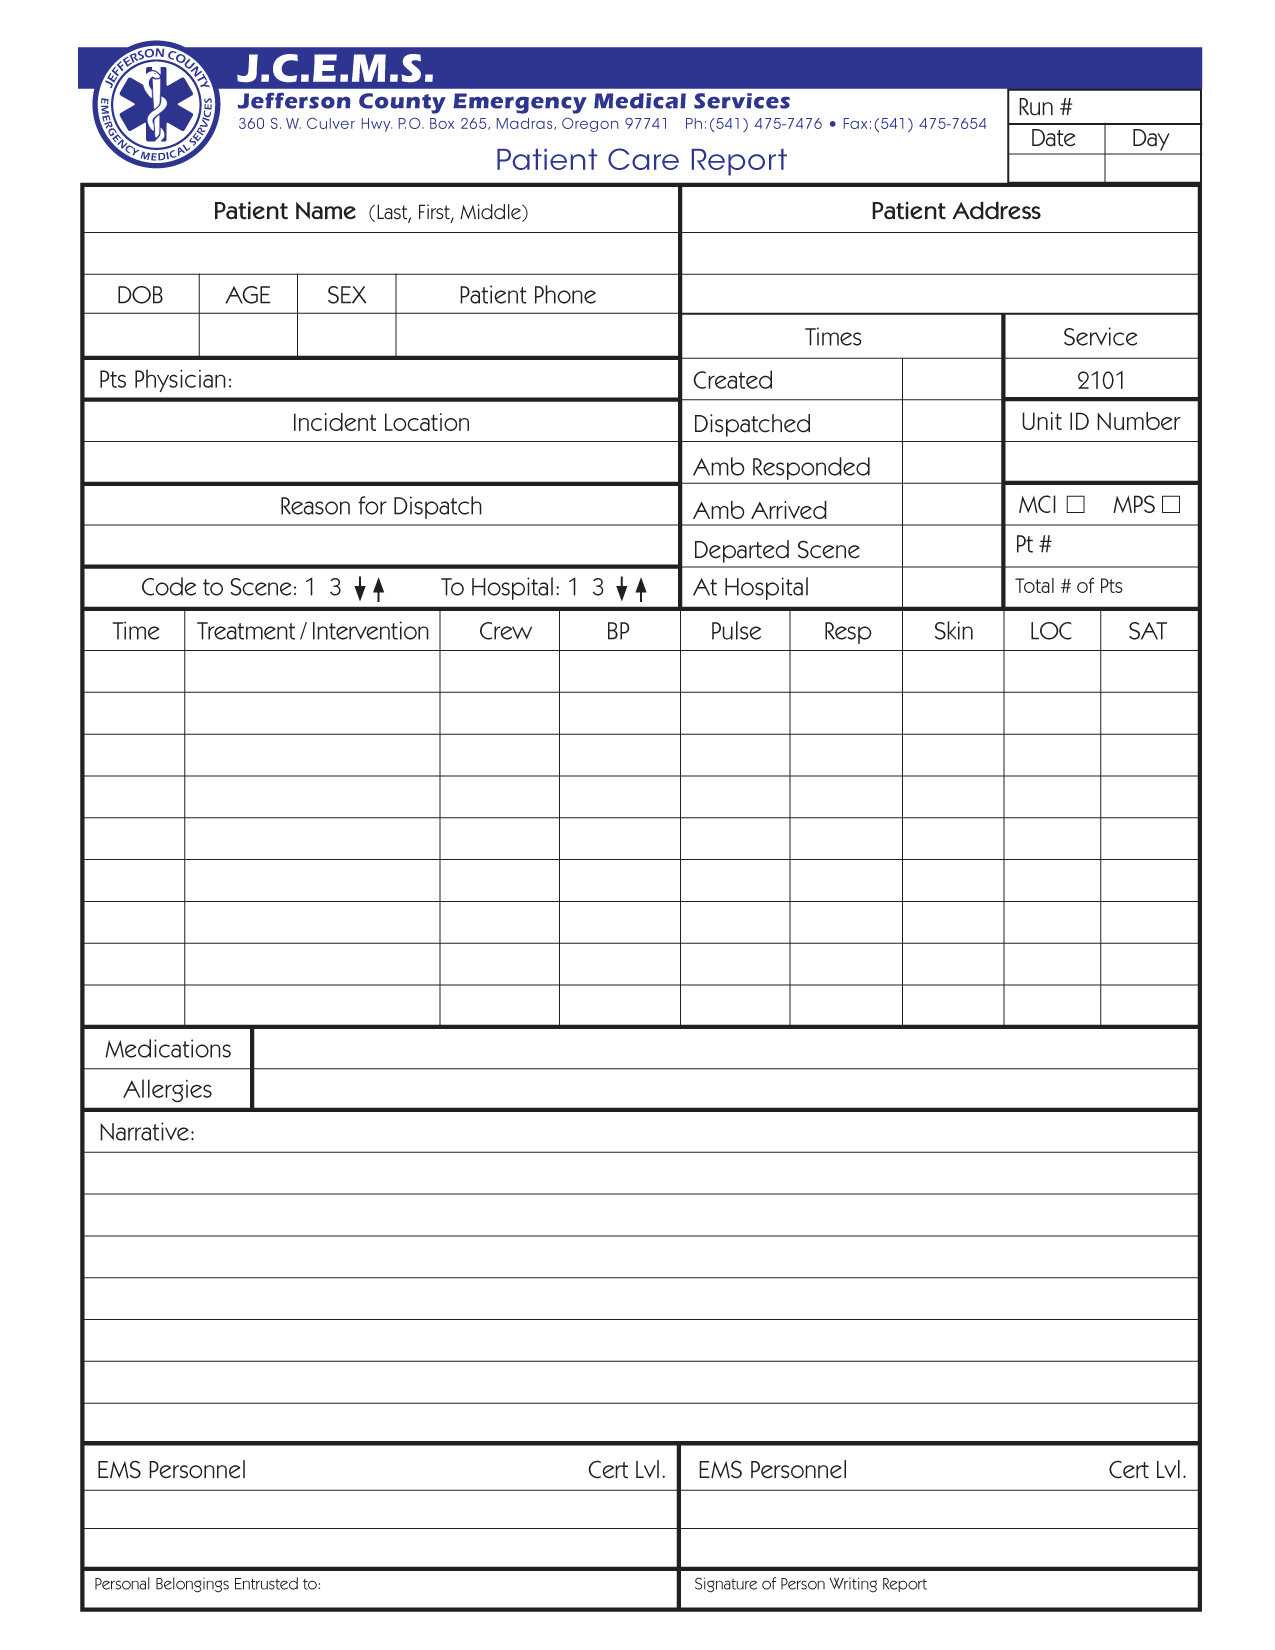 Patient Care Report Template Word Emt Example Ems Narrative For Patient Care Report Template